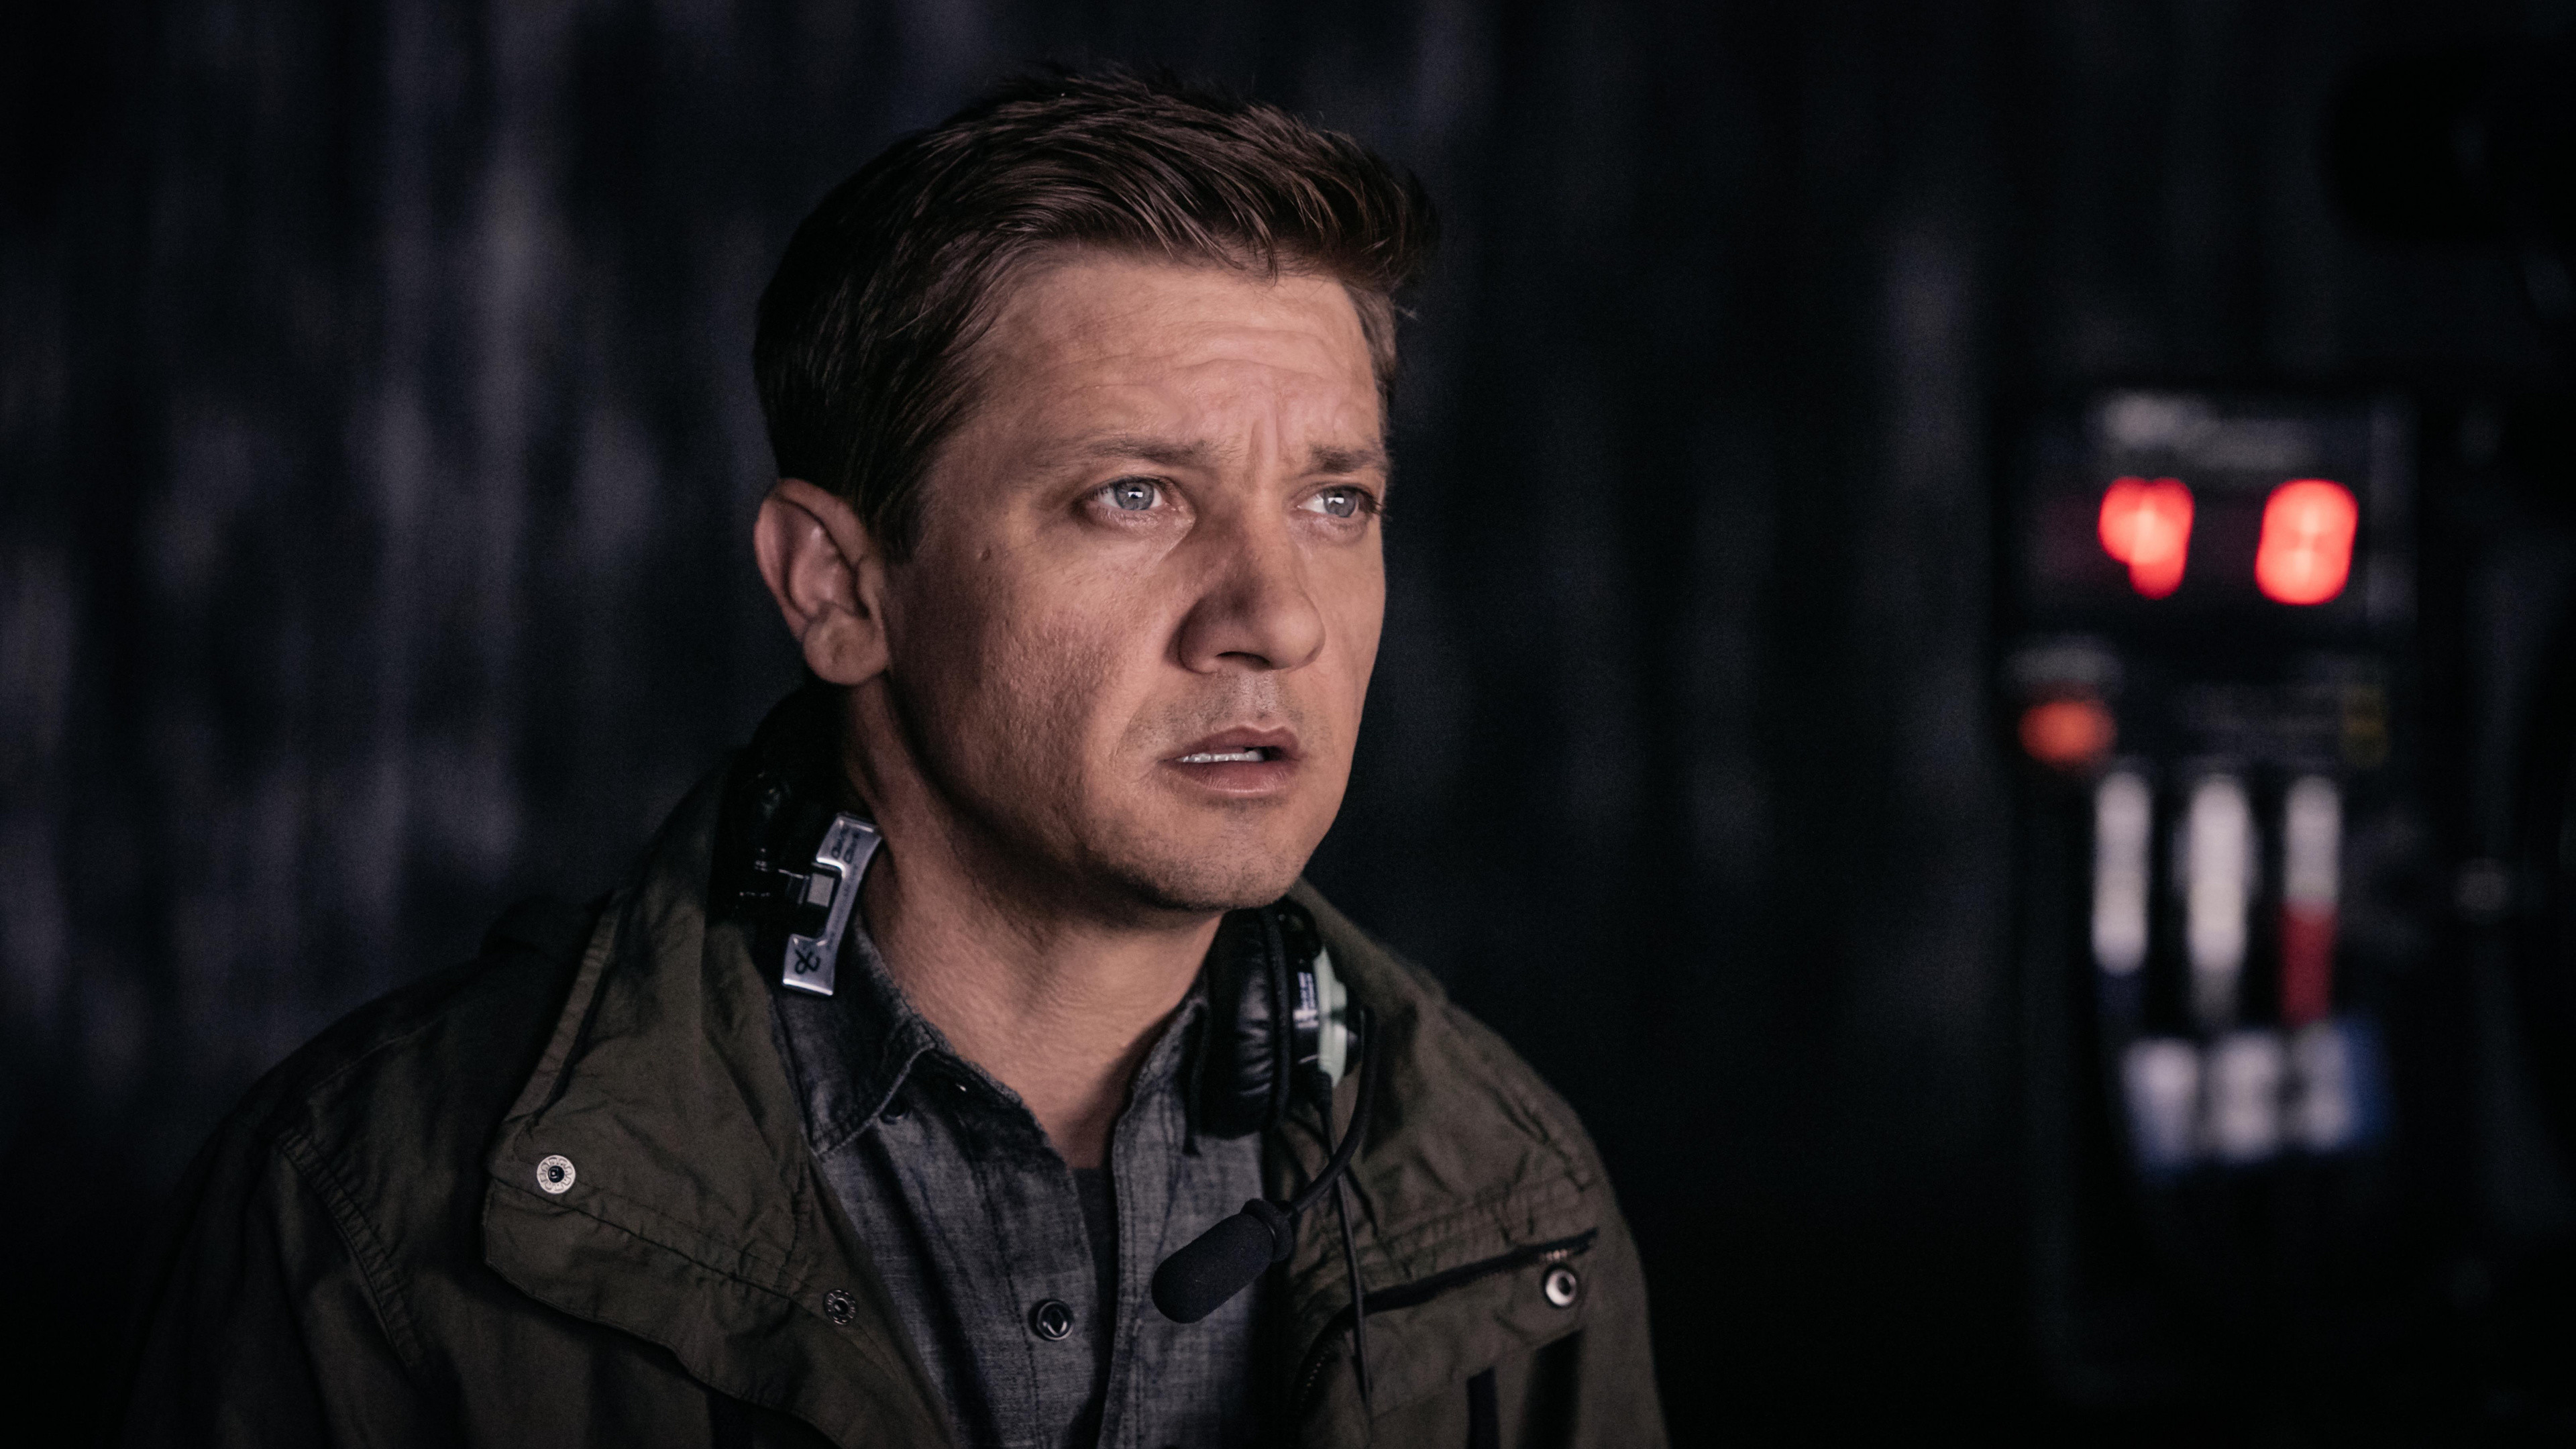 3840x2160  wallpaper Arrival movie, Jeremy Renner, actor